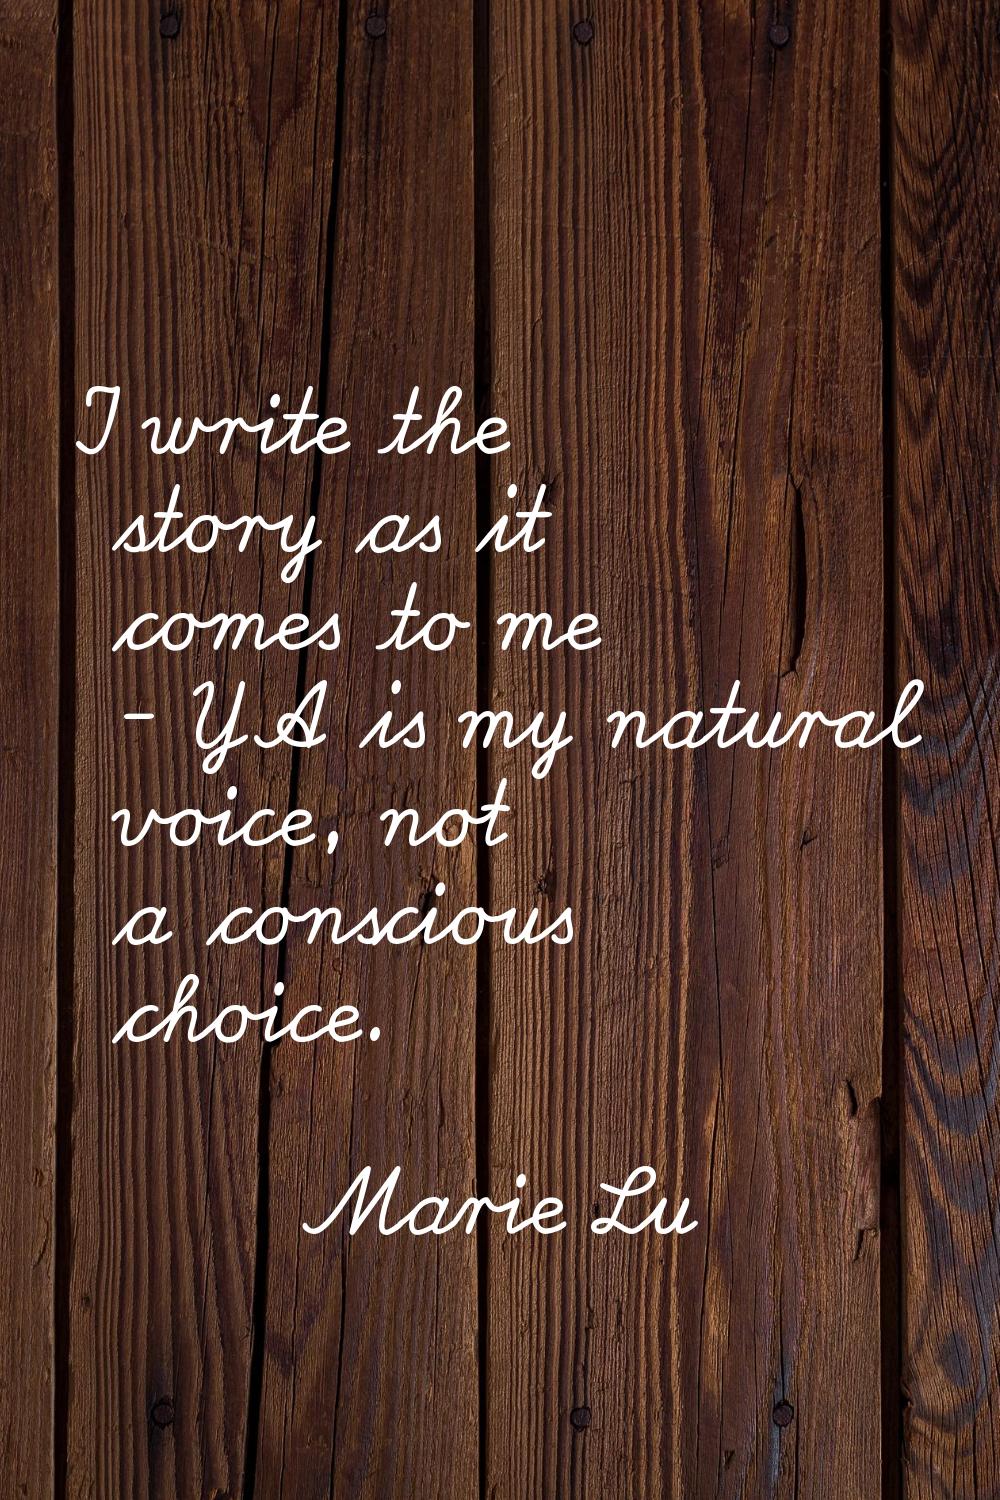 I write the story as it comes to me - YA is my natural voice, not a conscious choice.